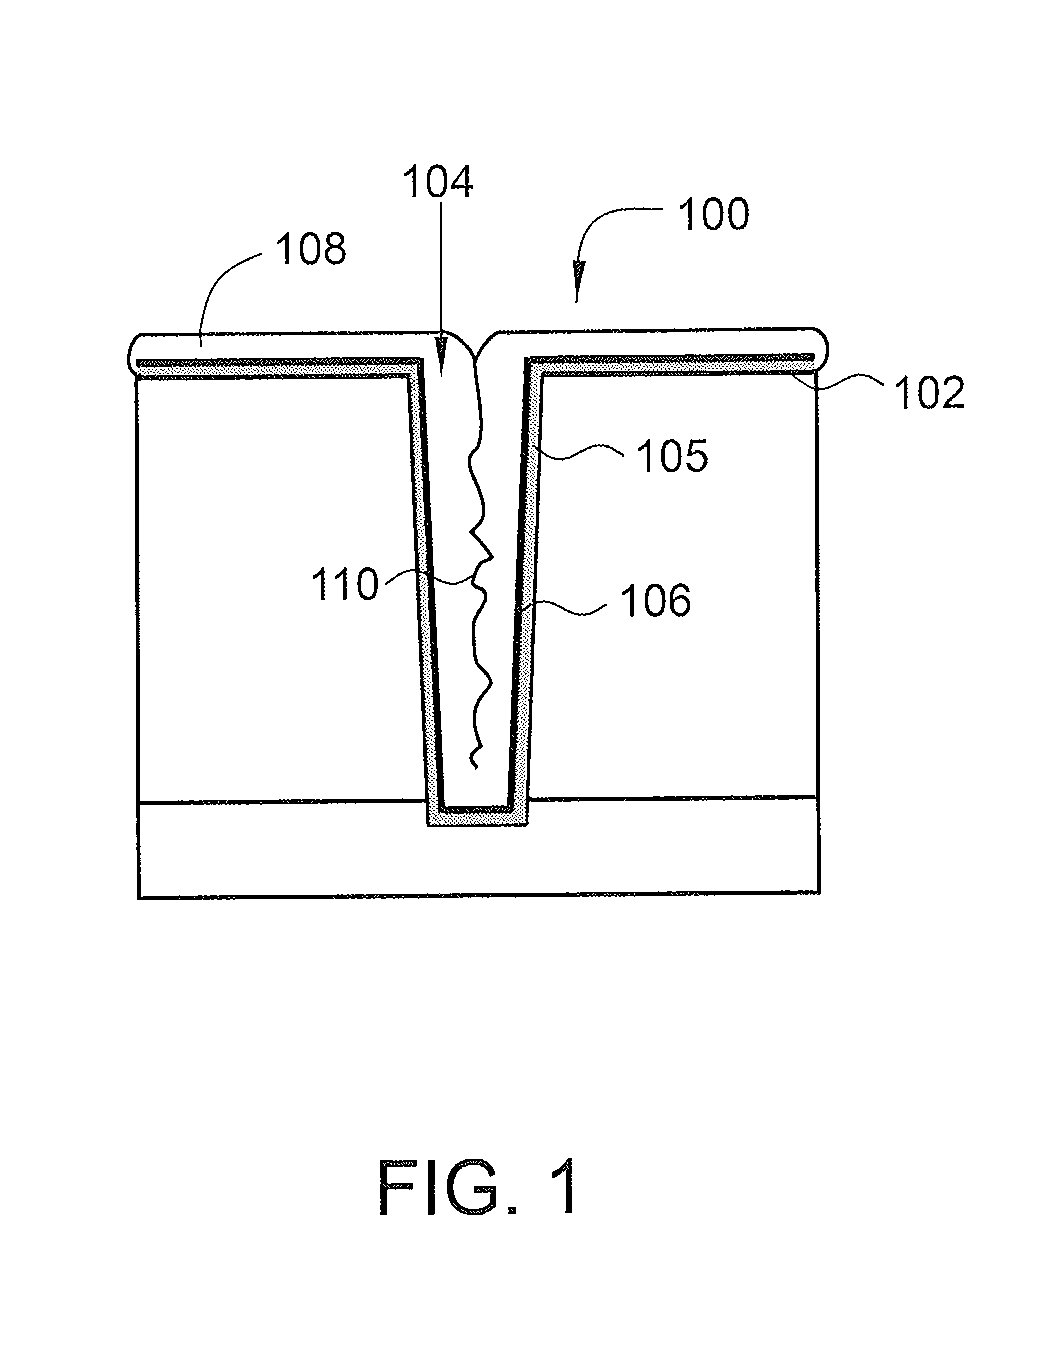 Plasma treatment of film for impurity removal